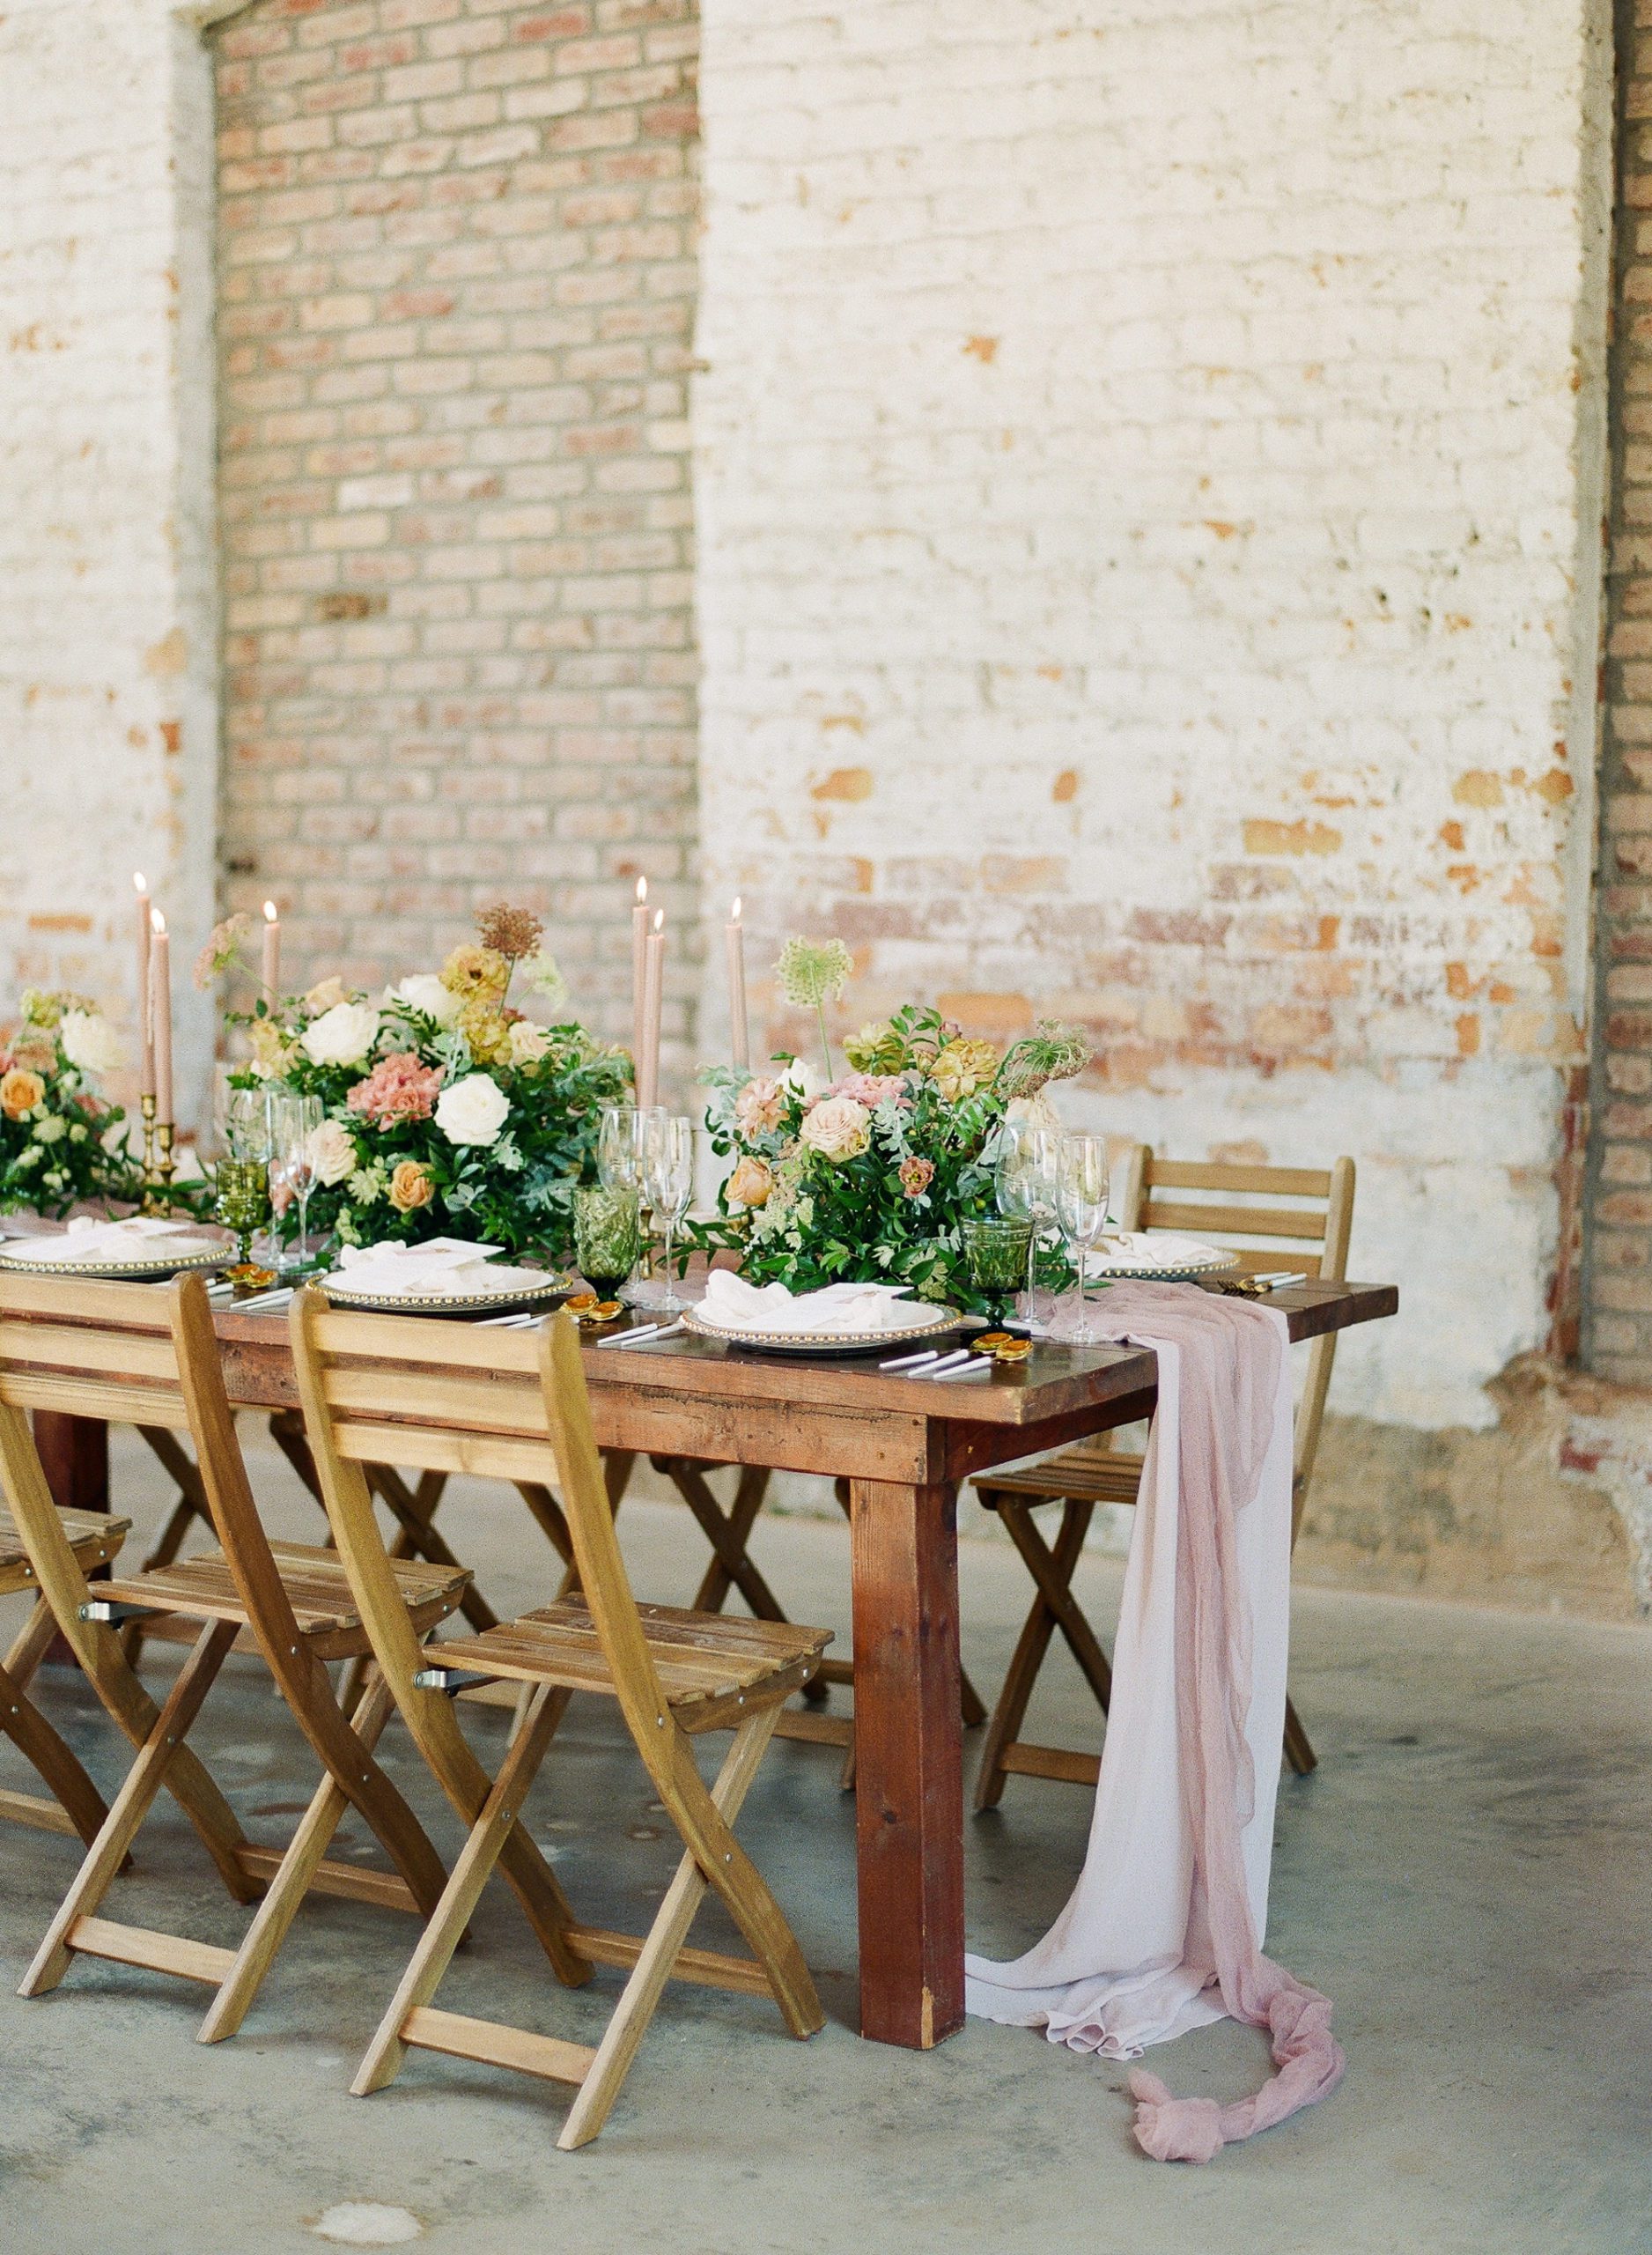 Wedding Reception Table with Pink Candles and Table Runner Photo